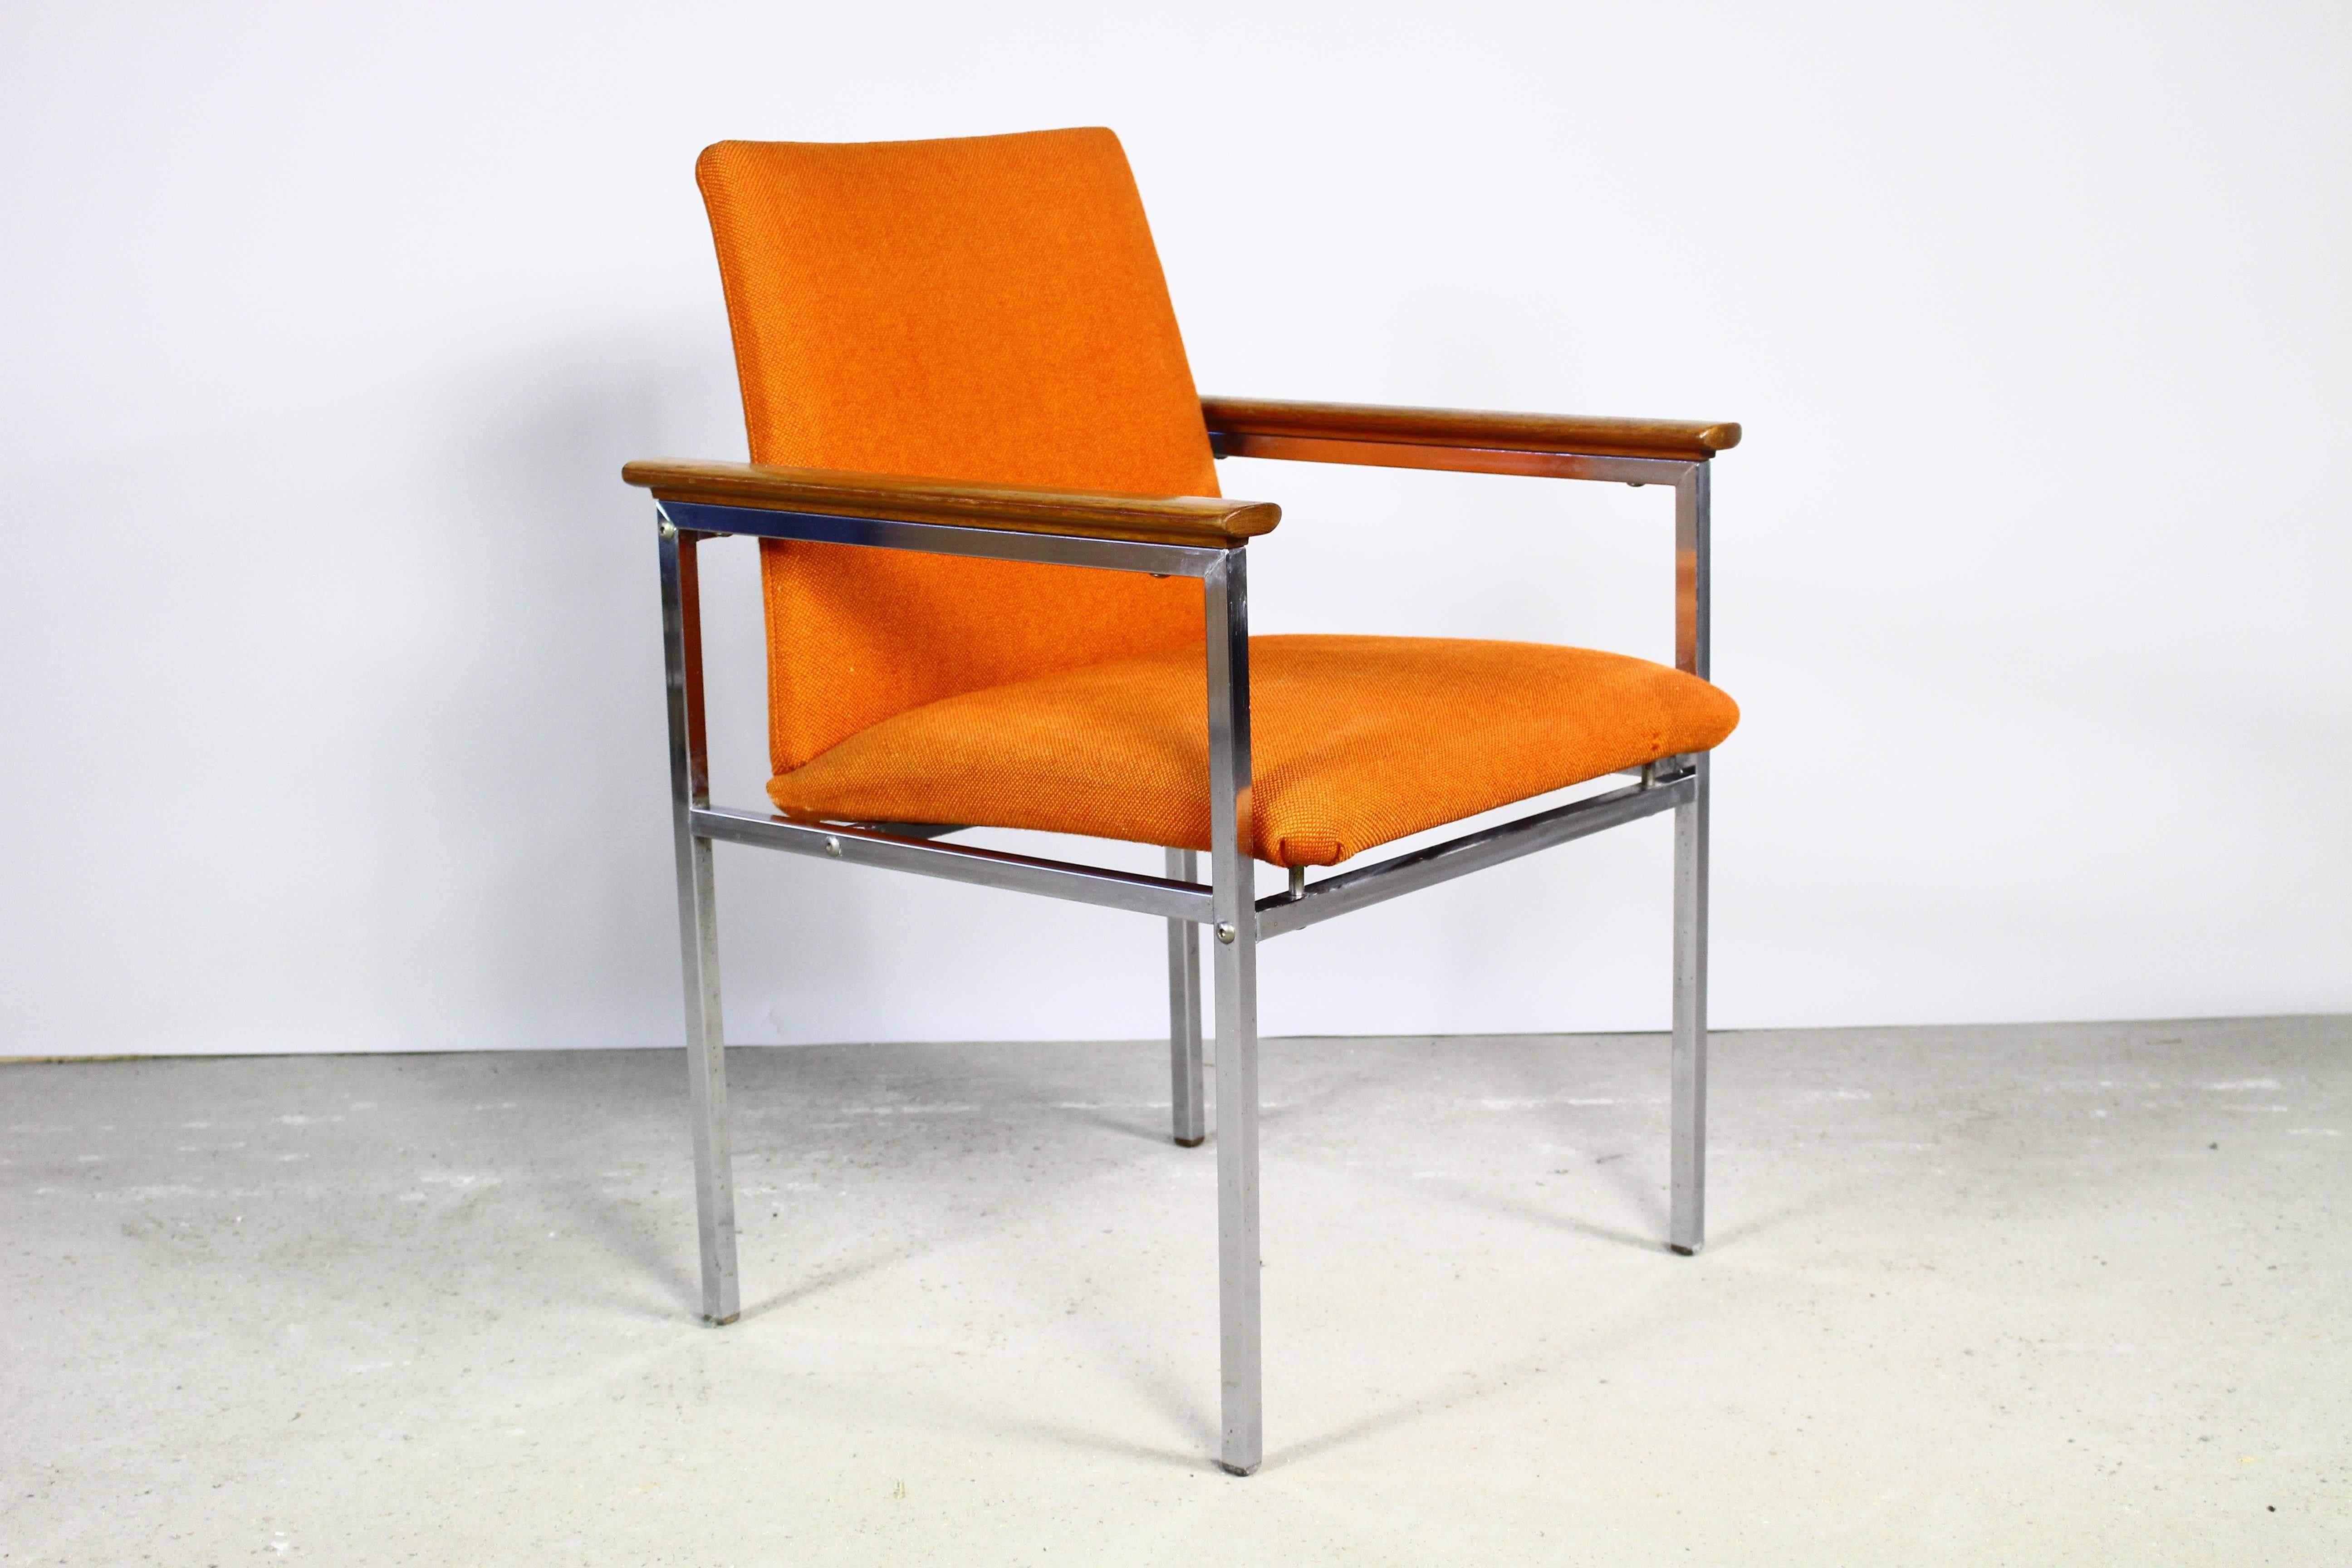 Scandinavian Mid-Century Modern armchair. 
Designed by renowned Swedish designer Sigvard Bernadotte and produced by Danish manufacturer France & Son.
A chromed steel frame with wooden armrests.
Armchair will be unfolded fot the shipping.